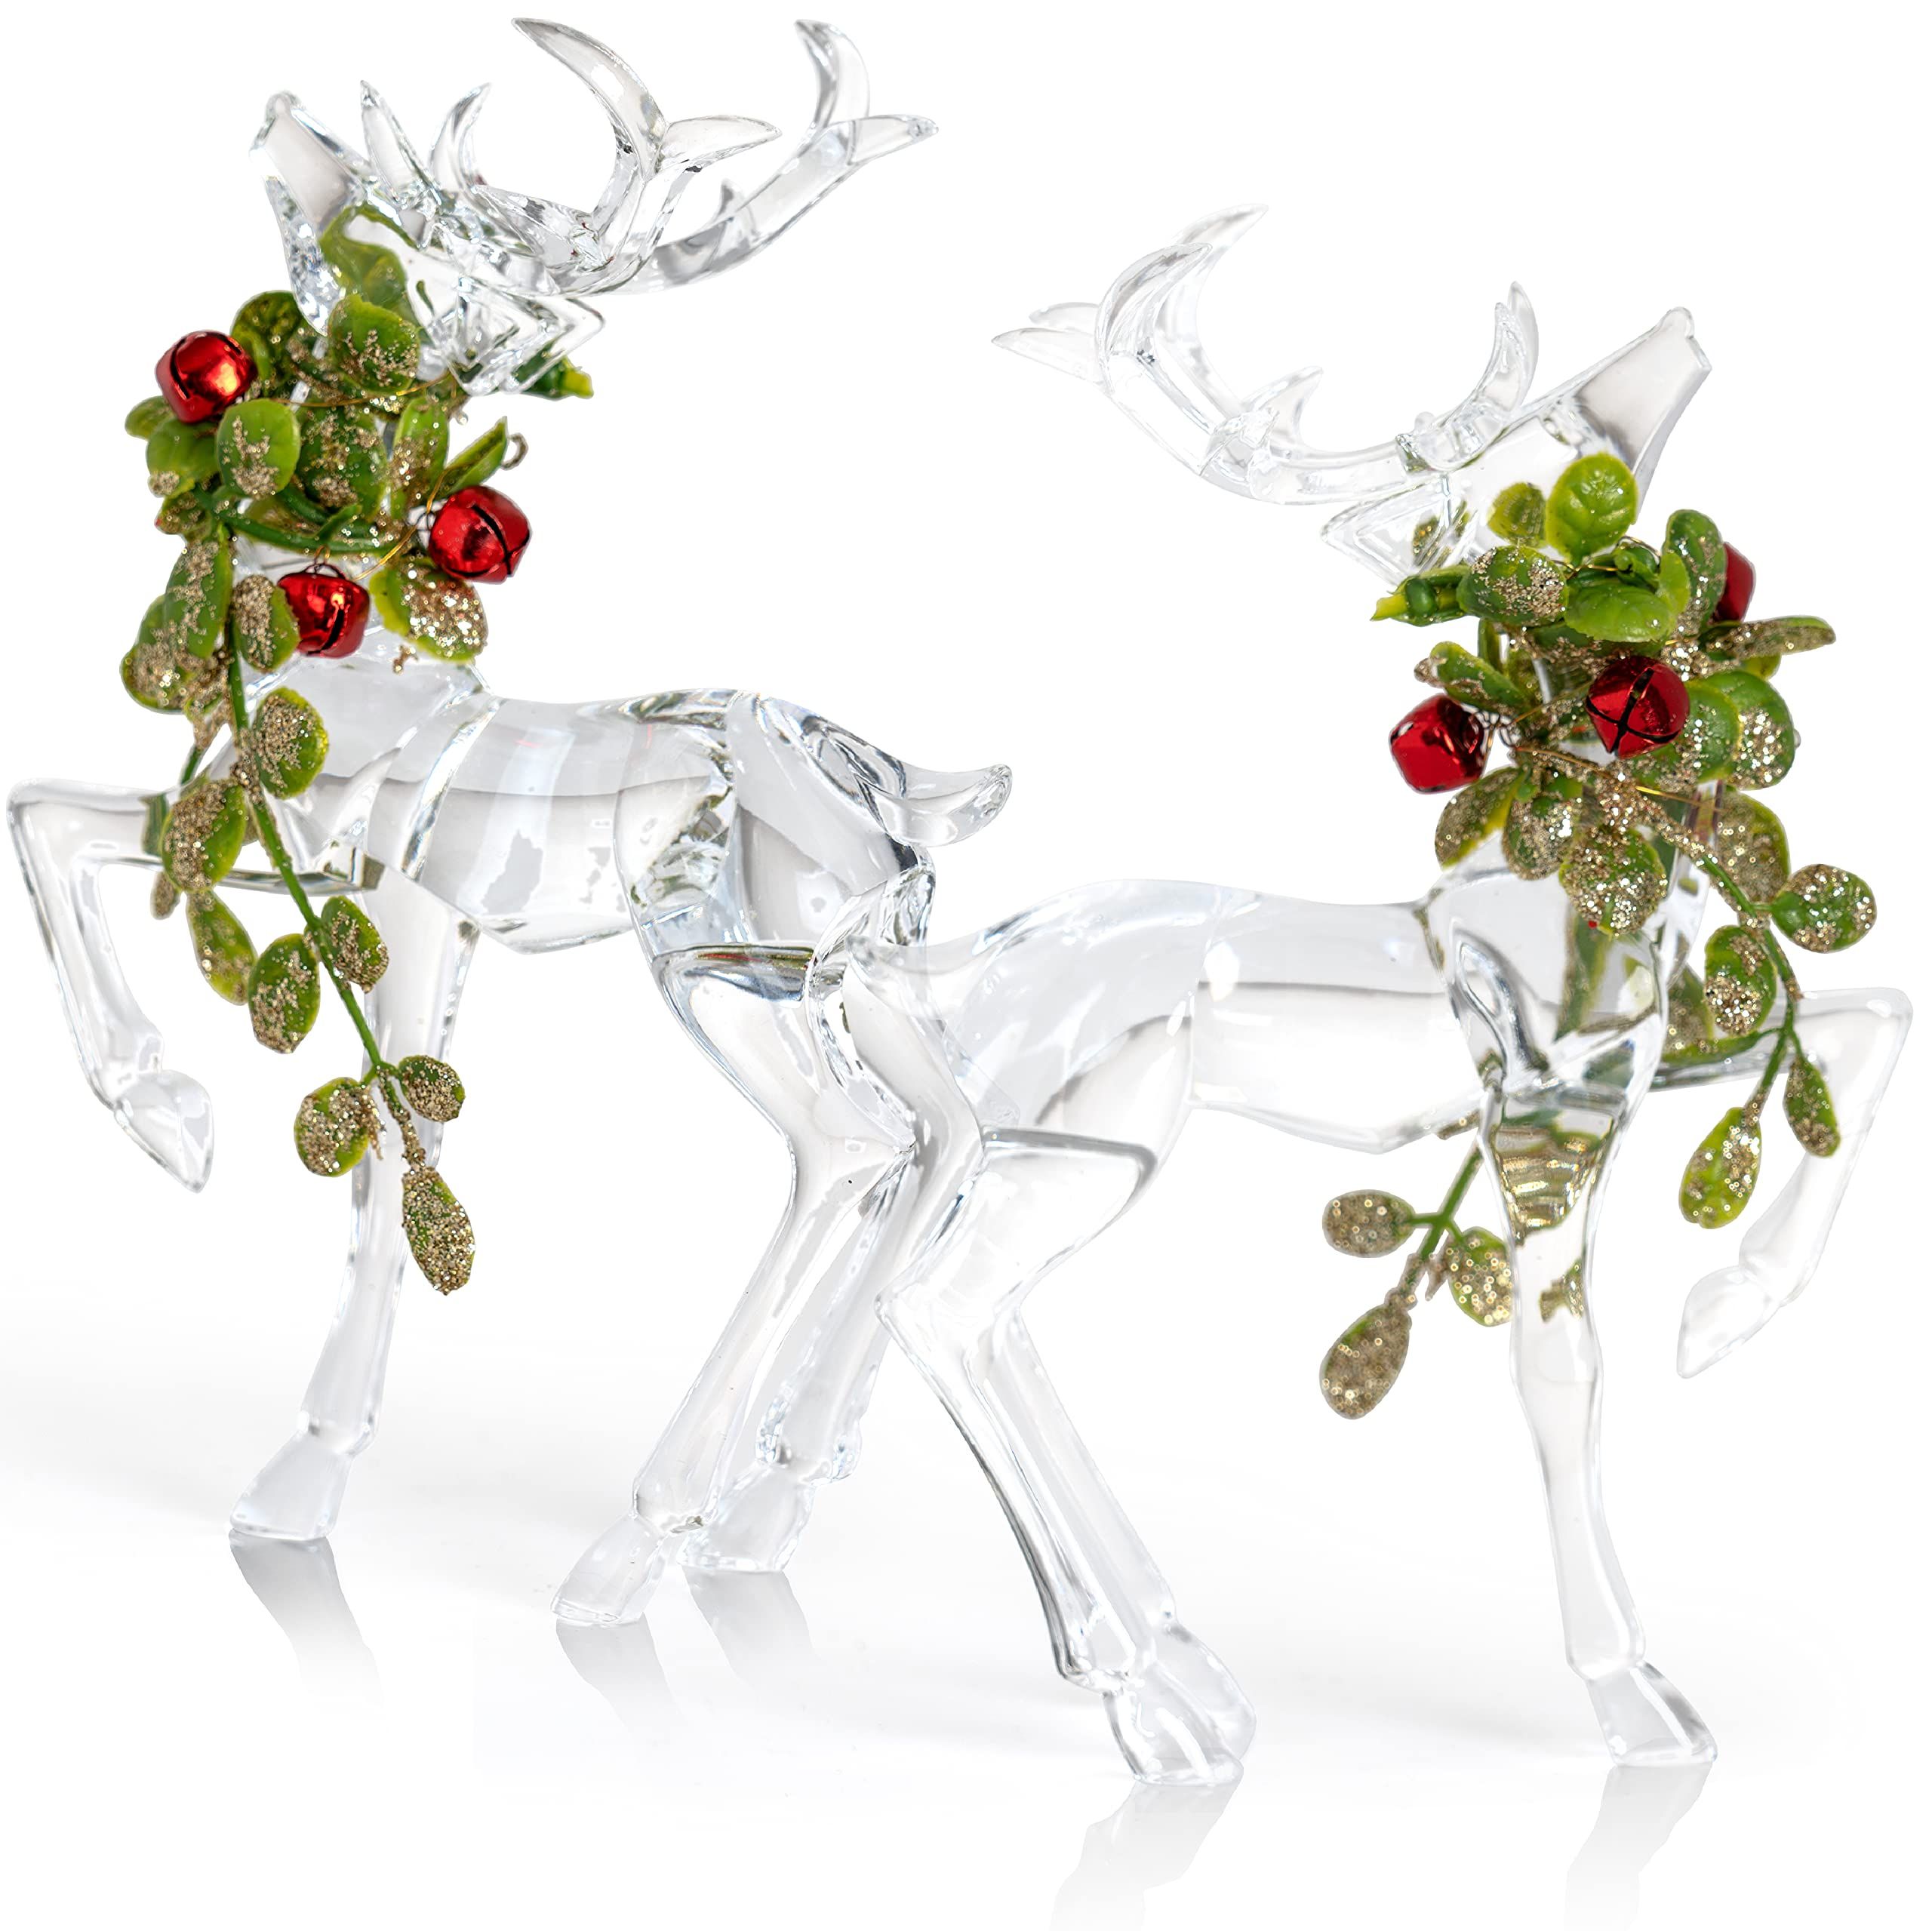 Ornativity Acrylic Christmas Reindeer Ornaments - Holiday Clear Party Deer Figurine Statues with ... | Walmart (US)